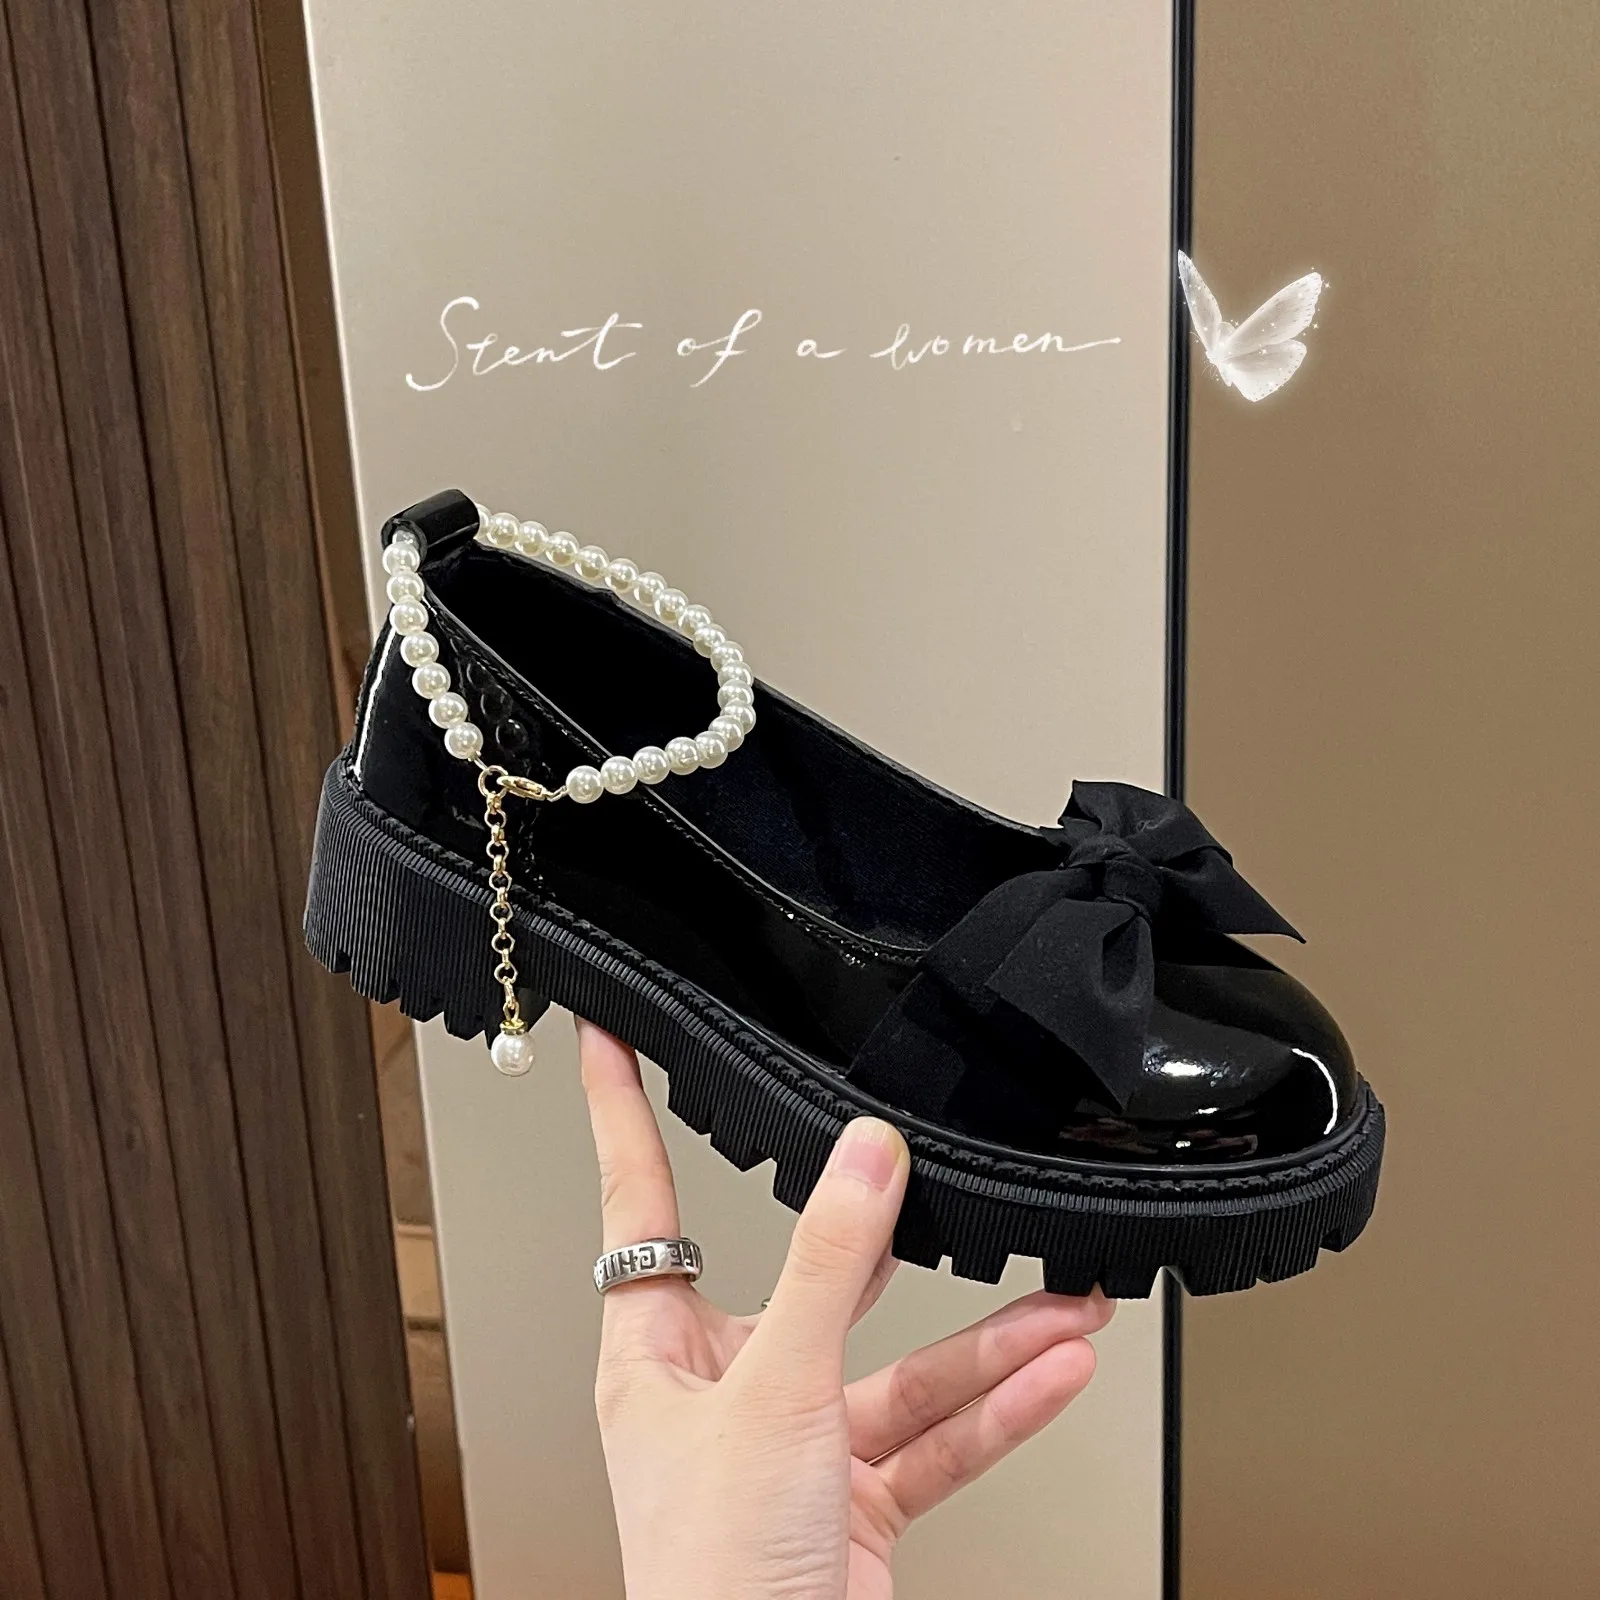 Women Thick Platform Mary Janes Lolita Shoes Party Pumps Summer 2022 New Sandals Bow Chain Mujer Shoes Fashion Oxford Zapatos